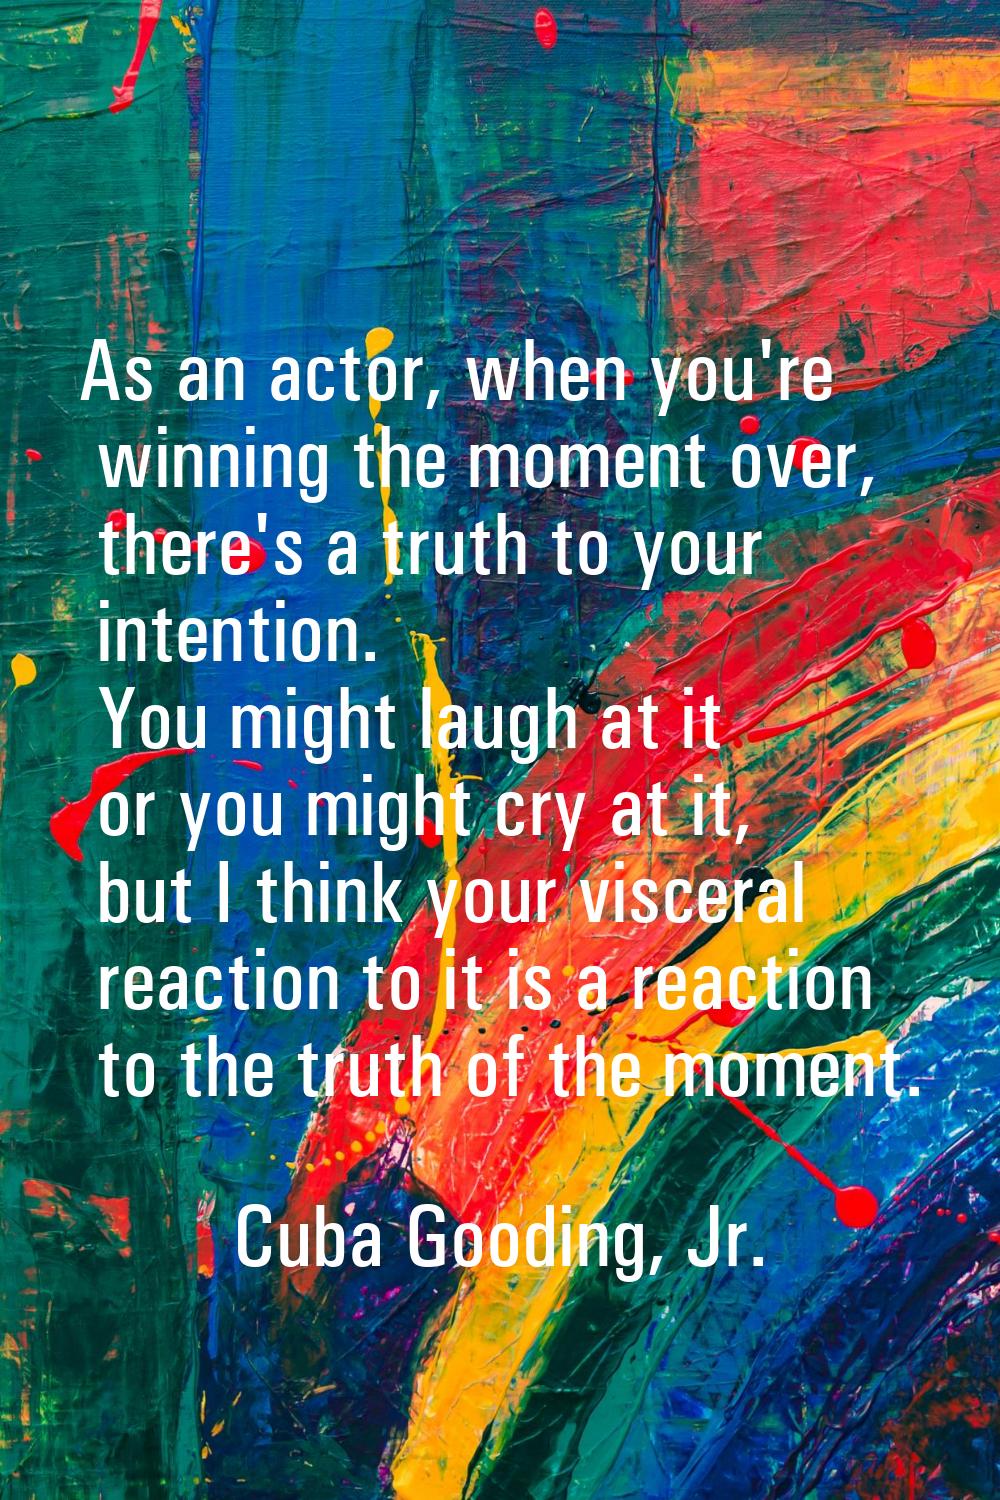 As an actor, when you're winning the moment over, there's a truth to your intention. You might laug